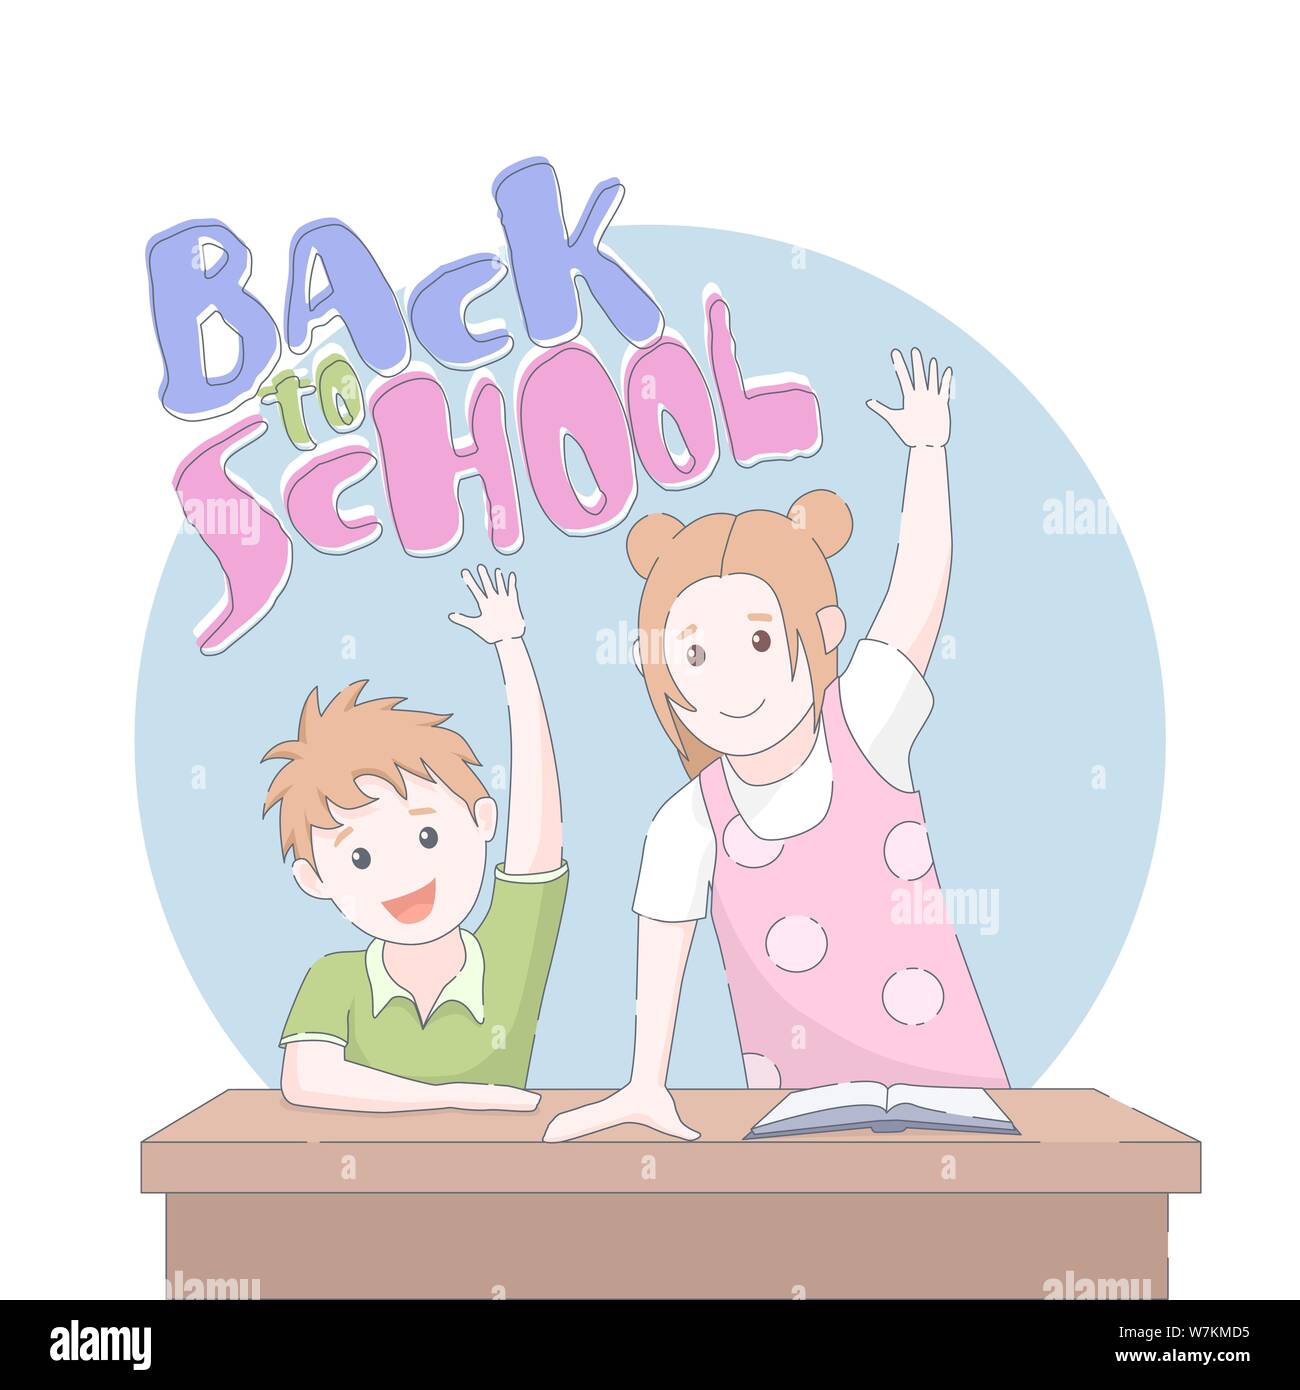 Two smiling young school children arms raised in class. Vector illustration. Stock Vector